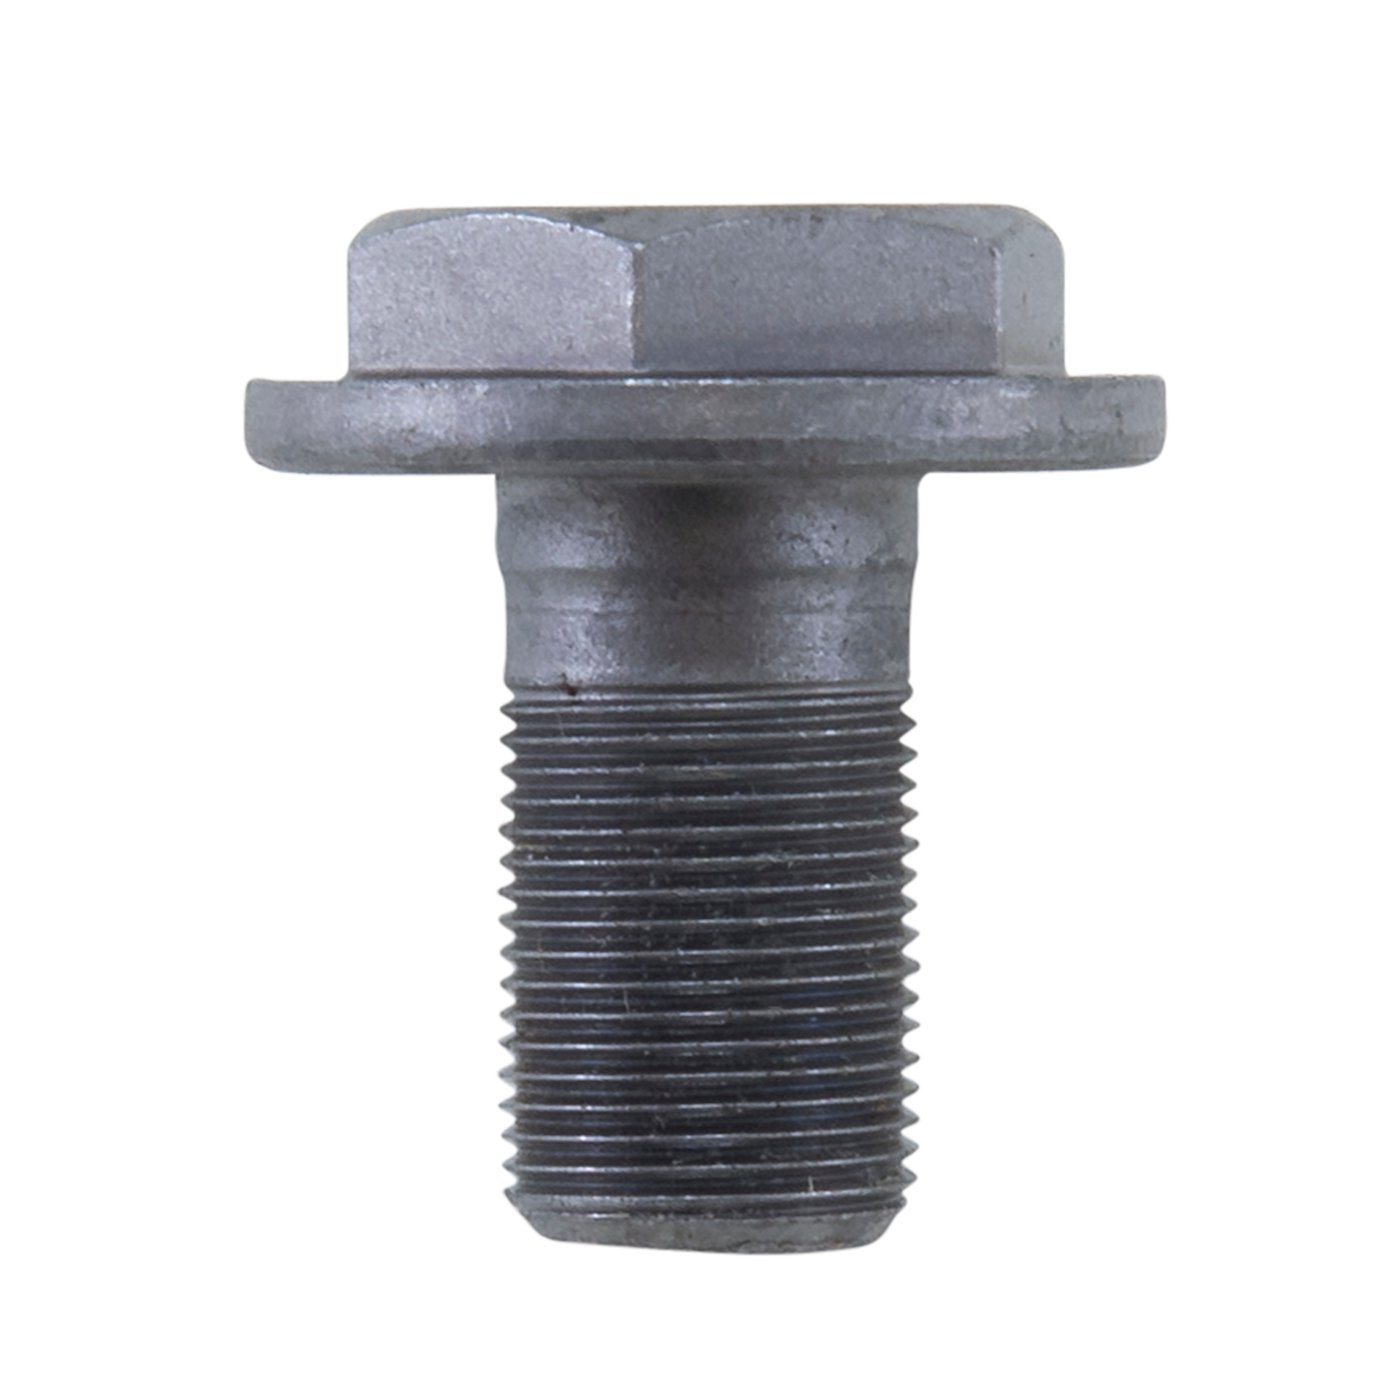 3/8 x 1-3/4 Pinion Support Bolt for Safety